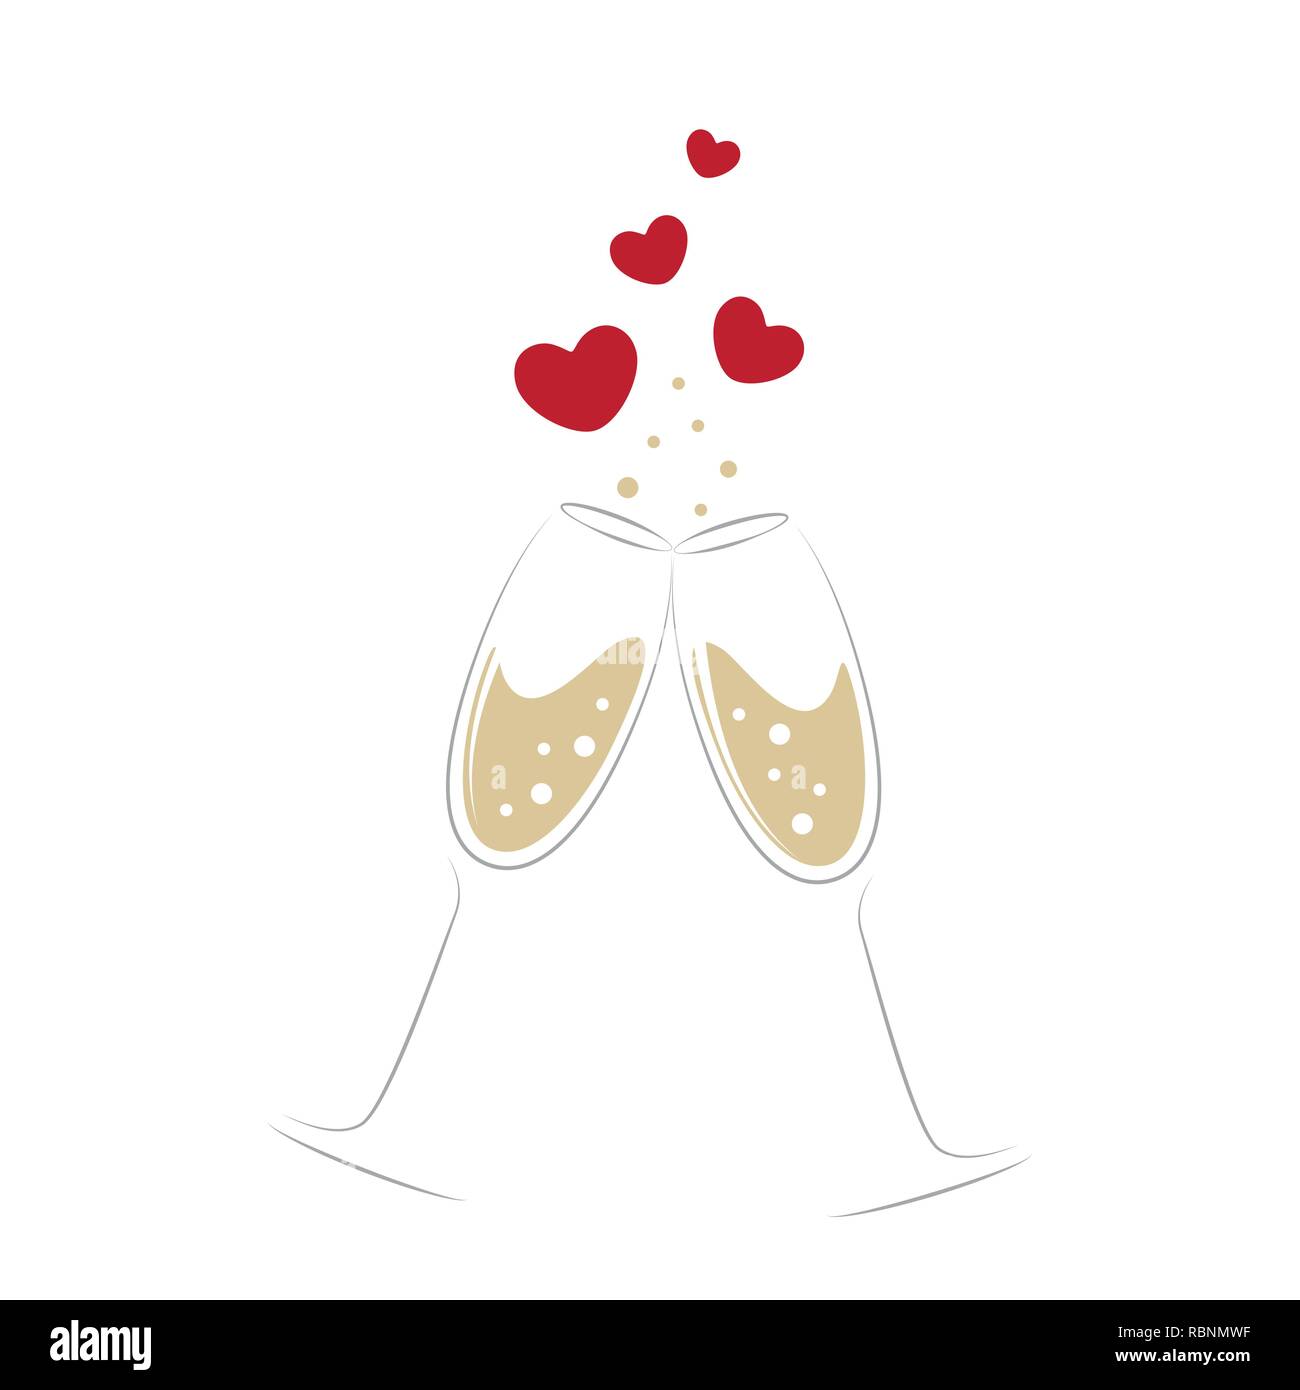 champagne glasses with hearts for wedding and valentines day vector illustration EPS10 Stock Vector